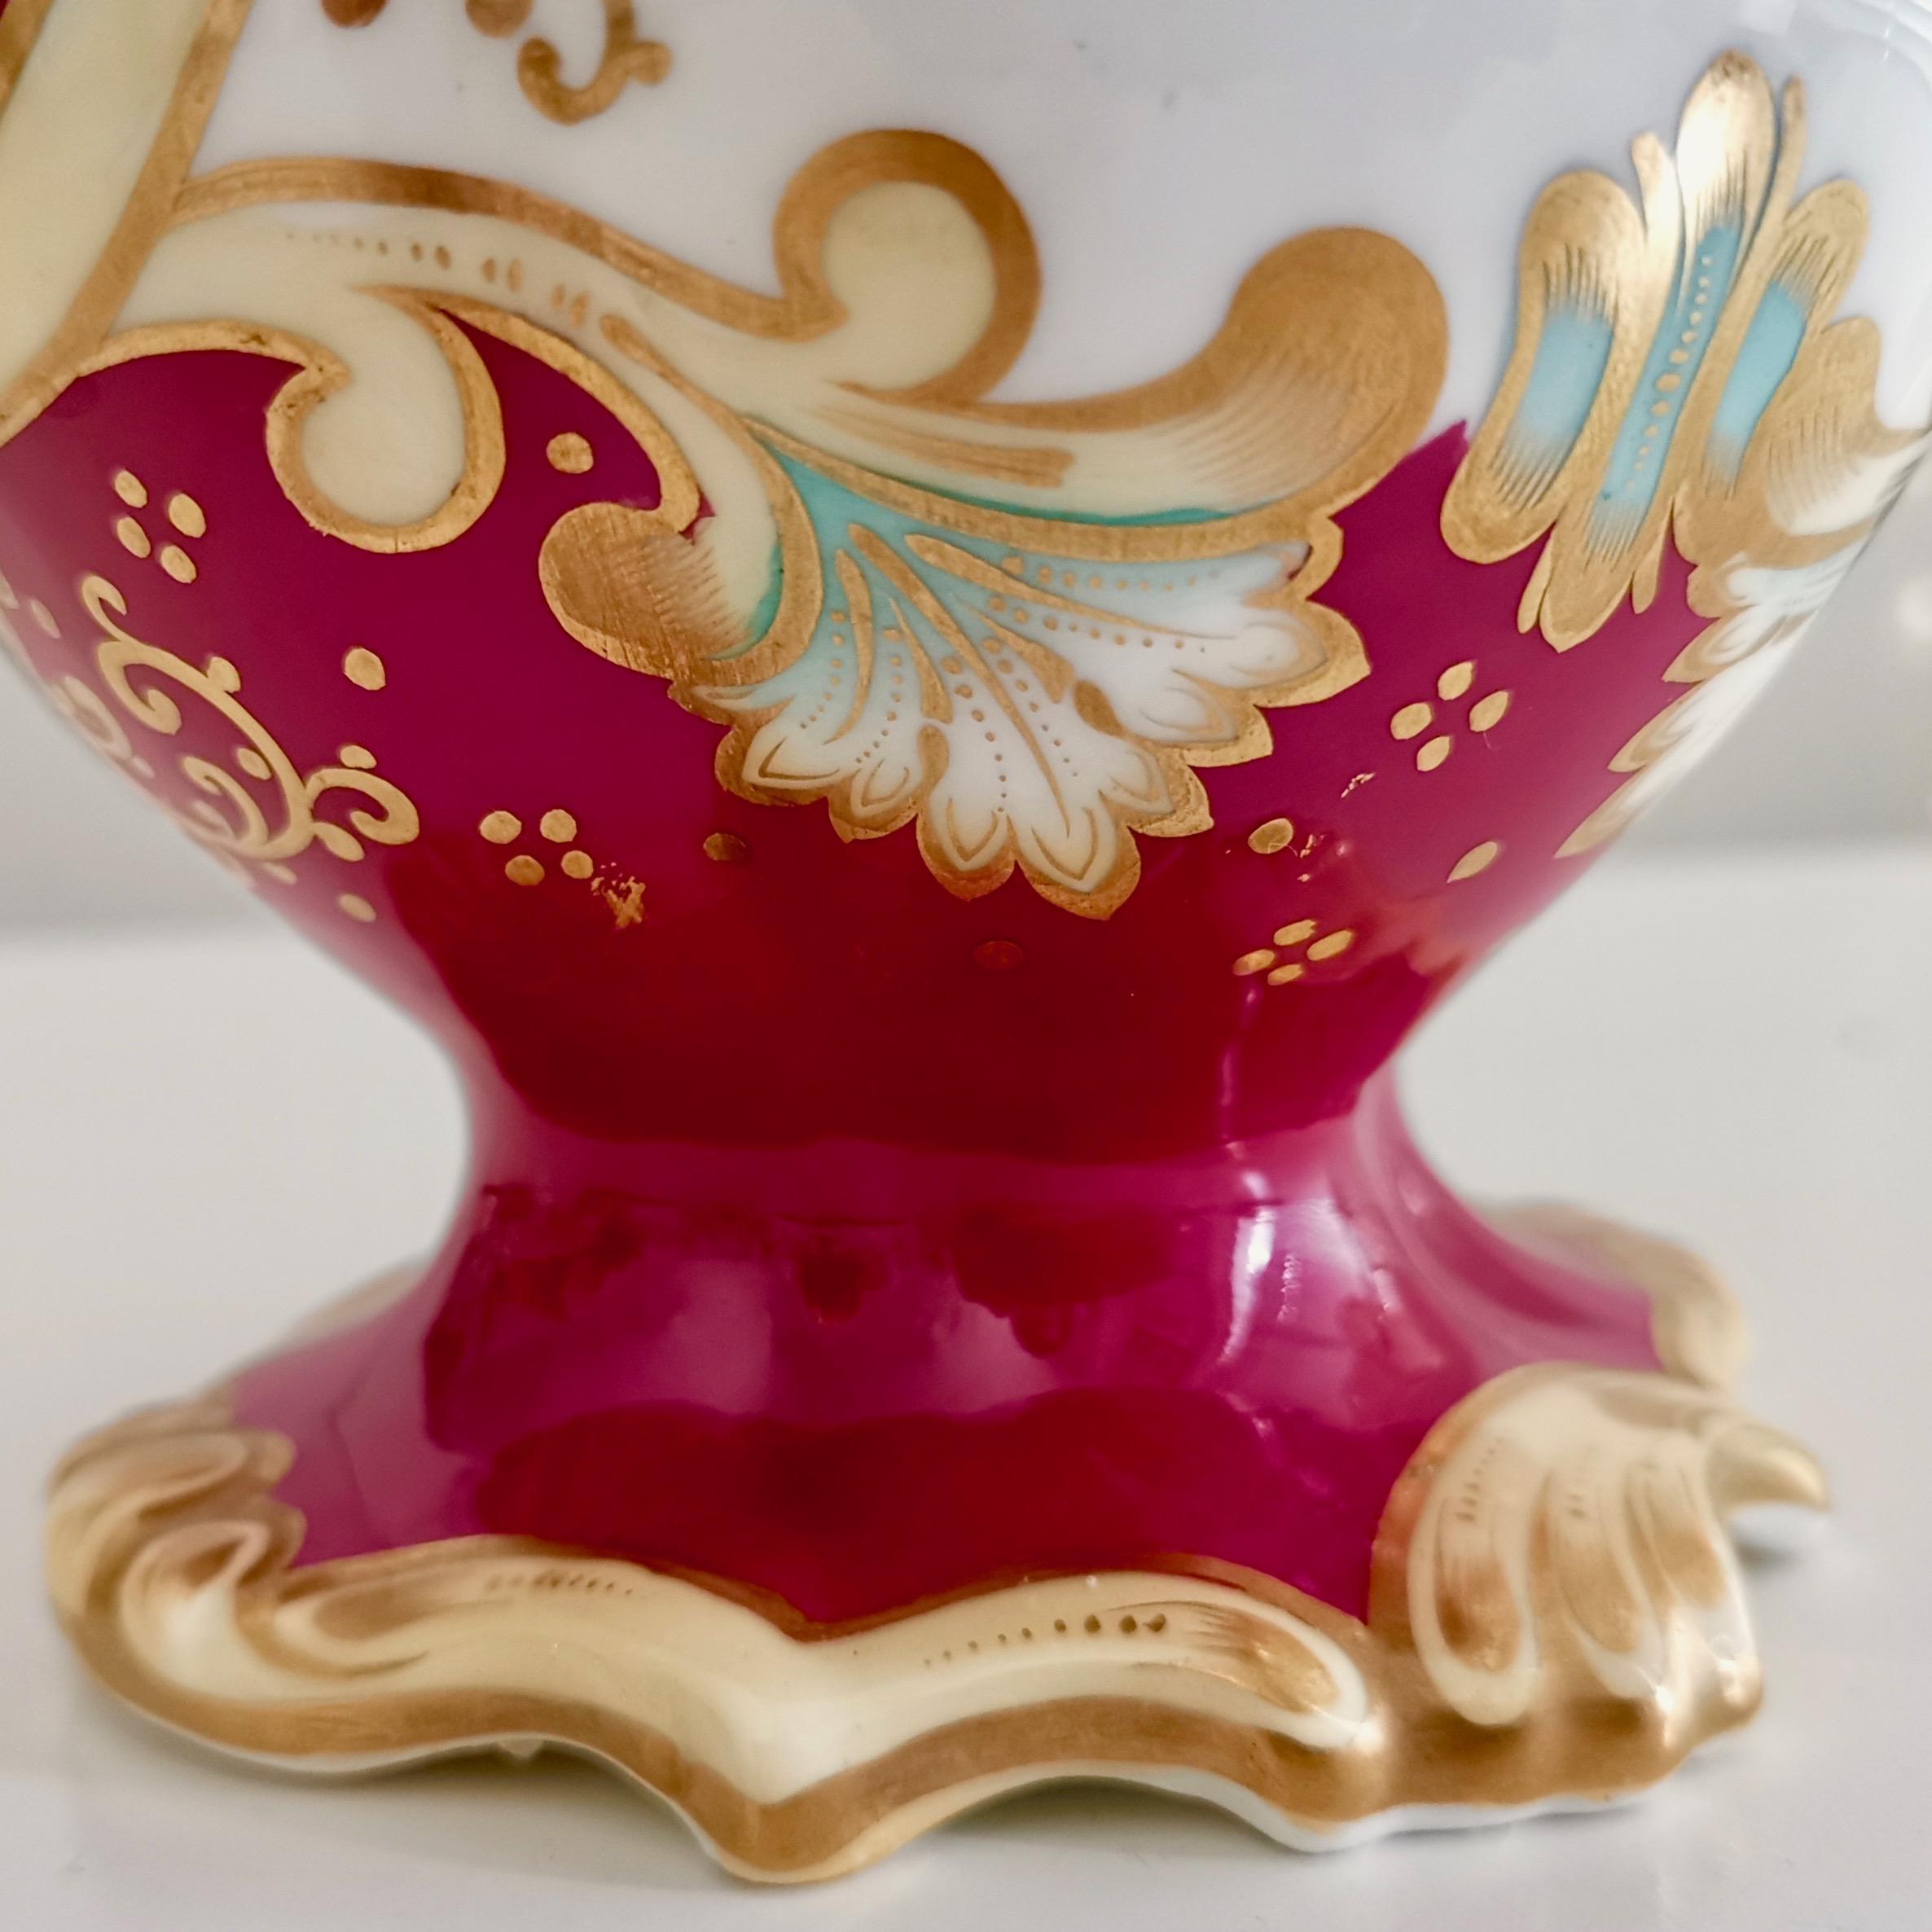 Samuel Alcock Porcelain Vase, Maroon with Landscapes, Rococo Revival, ca 1840 For Sale 1